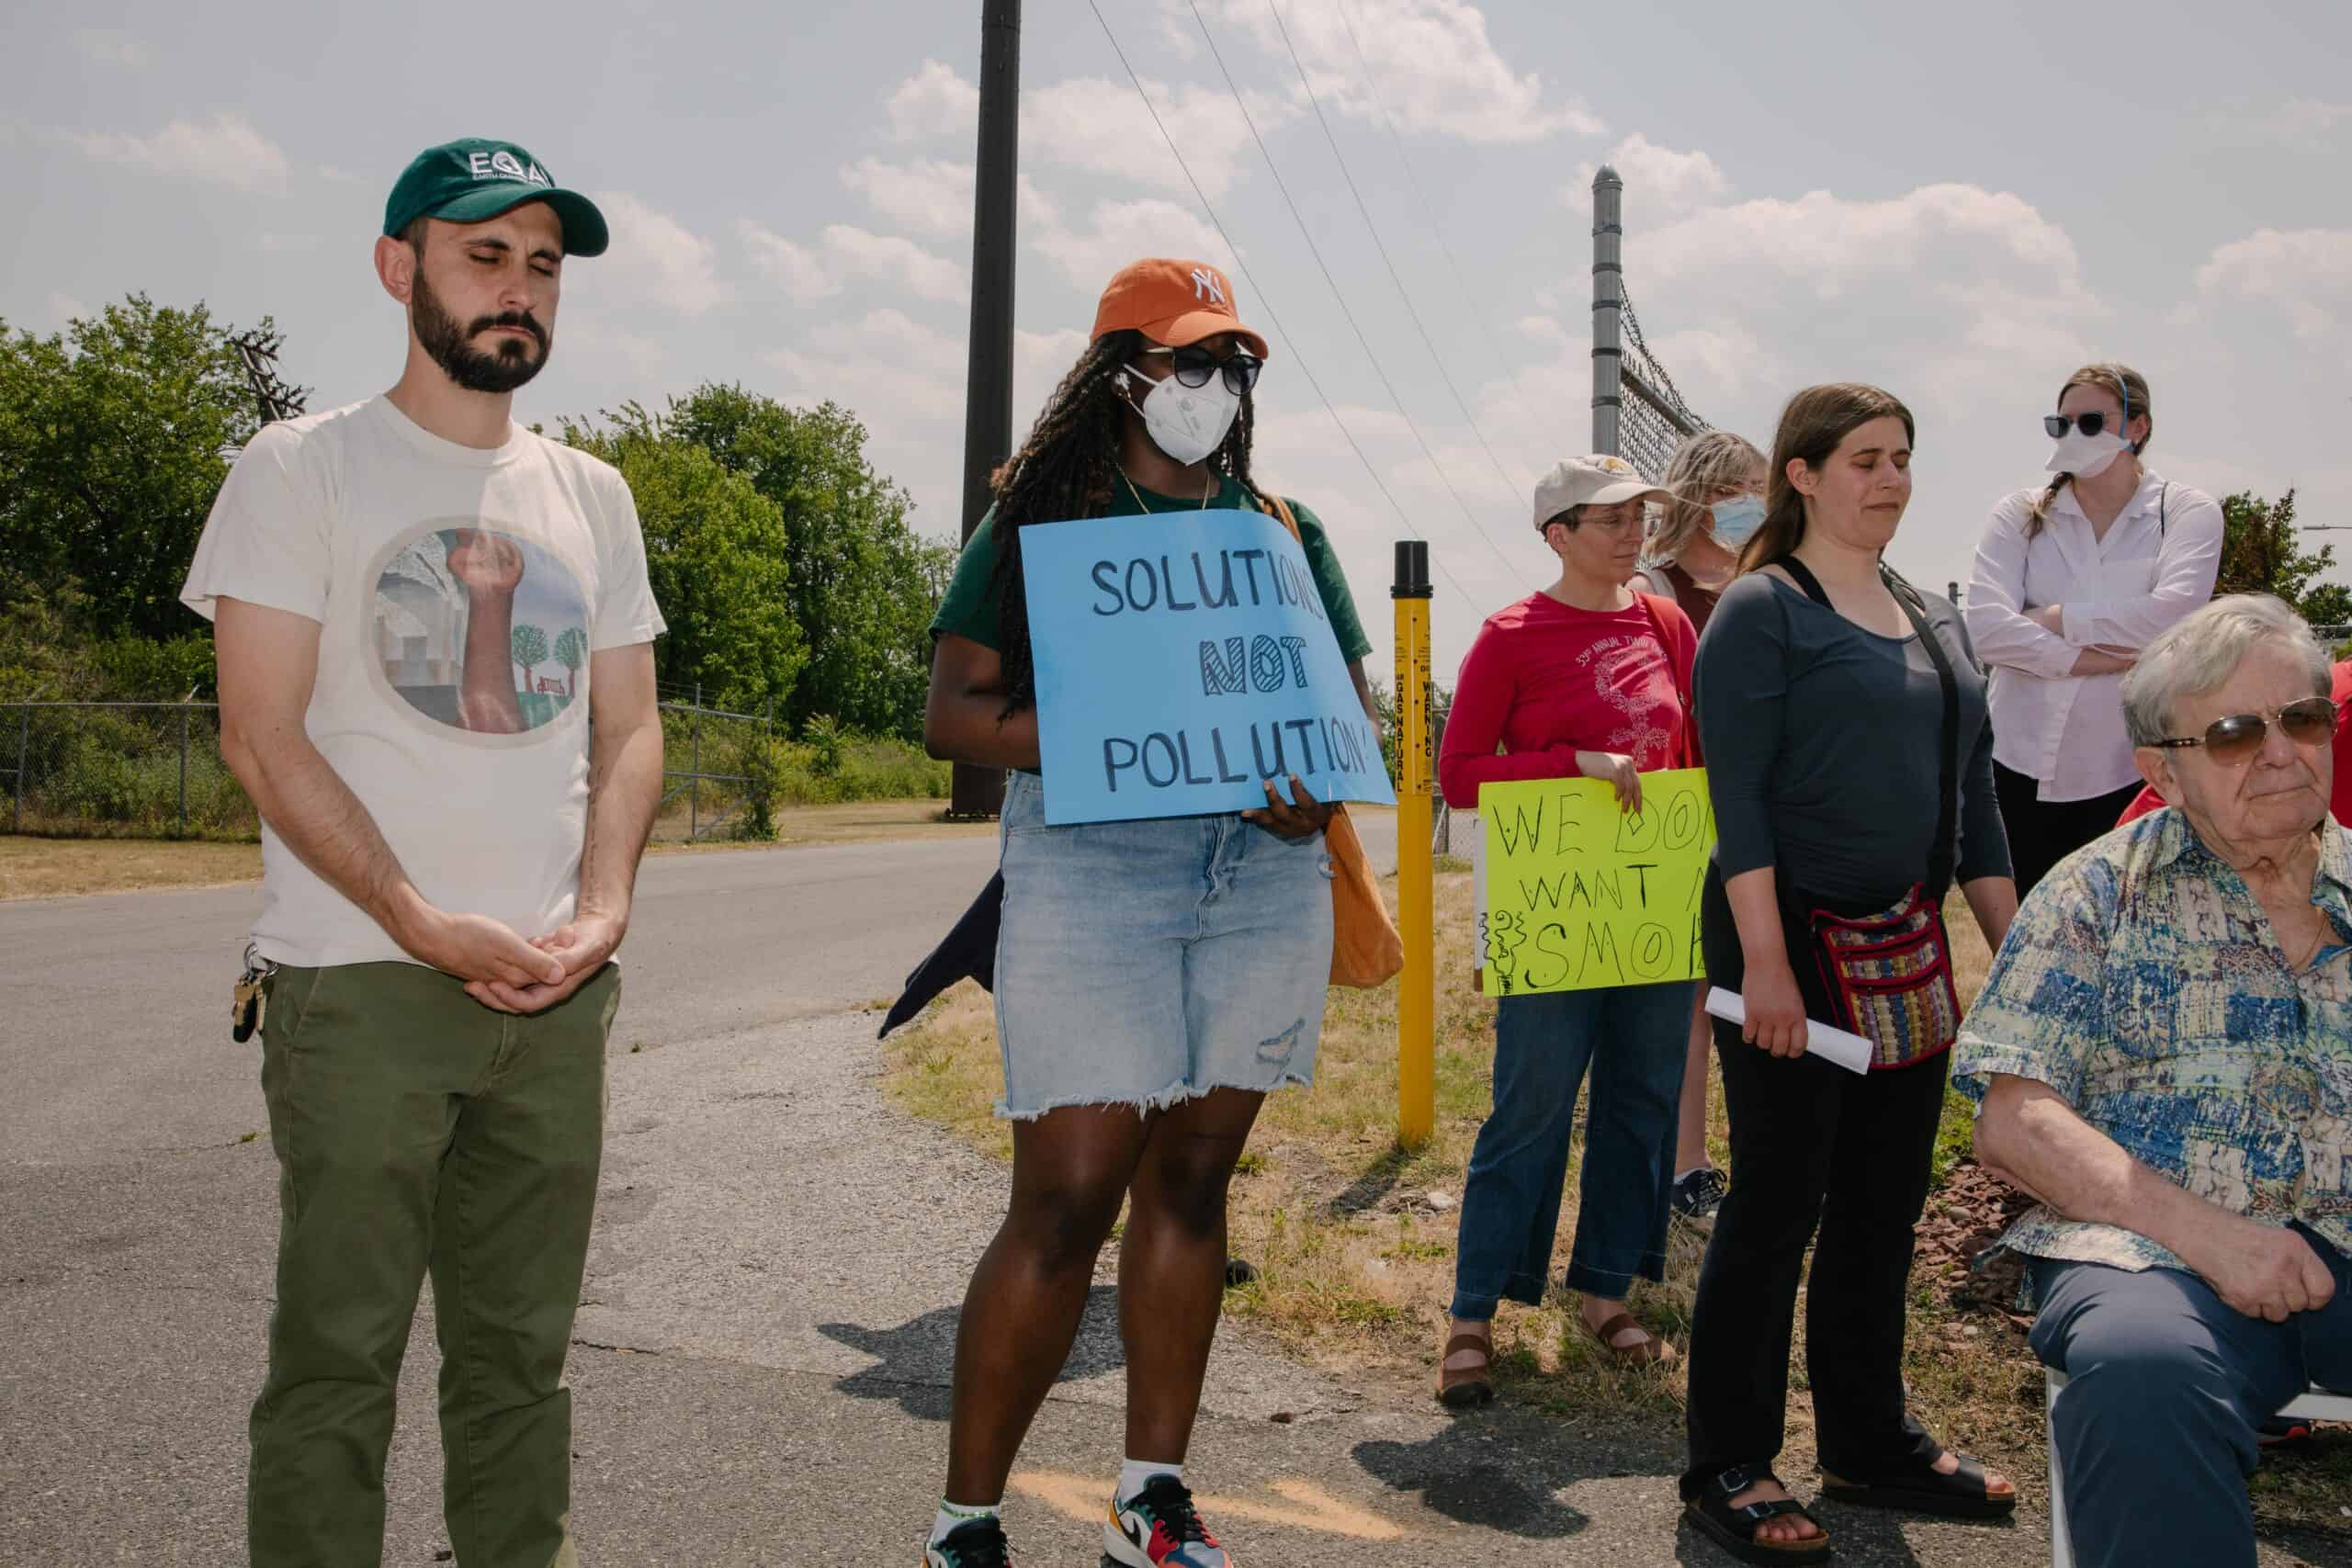 About seven people are seen standing and sitting outside, many with their eyes closed in reflection. One person is holding a sign that says "solutions not pollution."